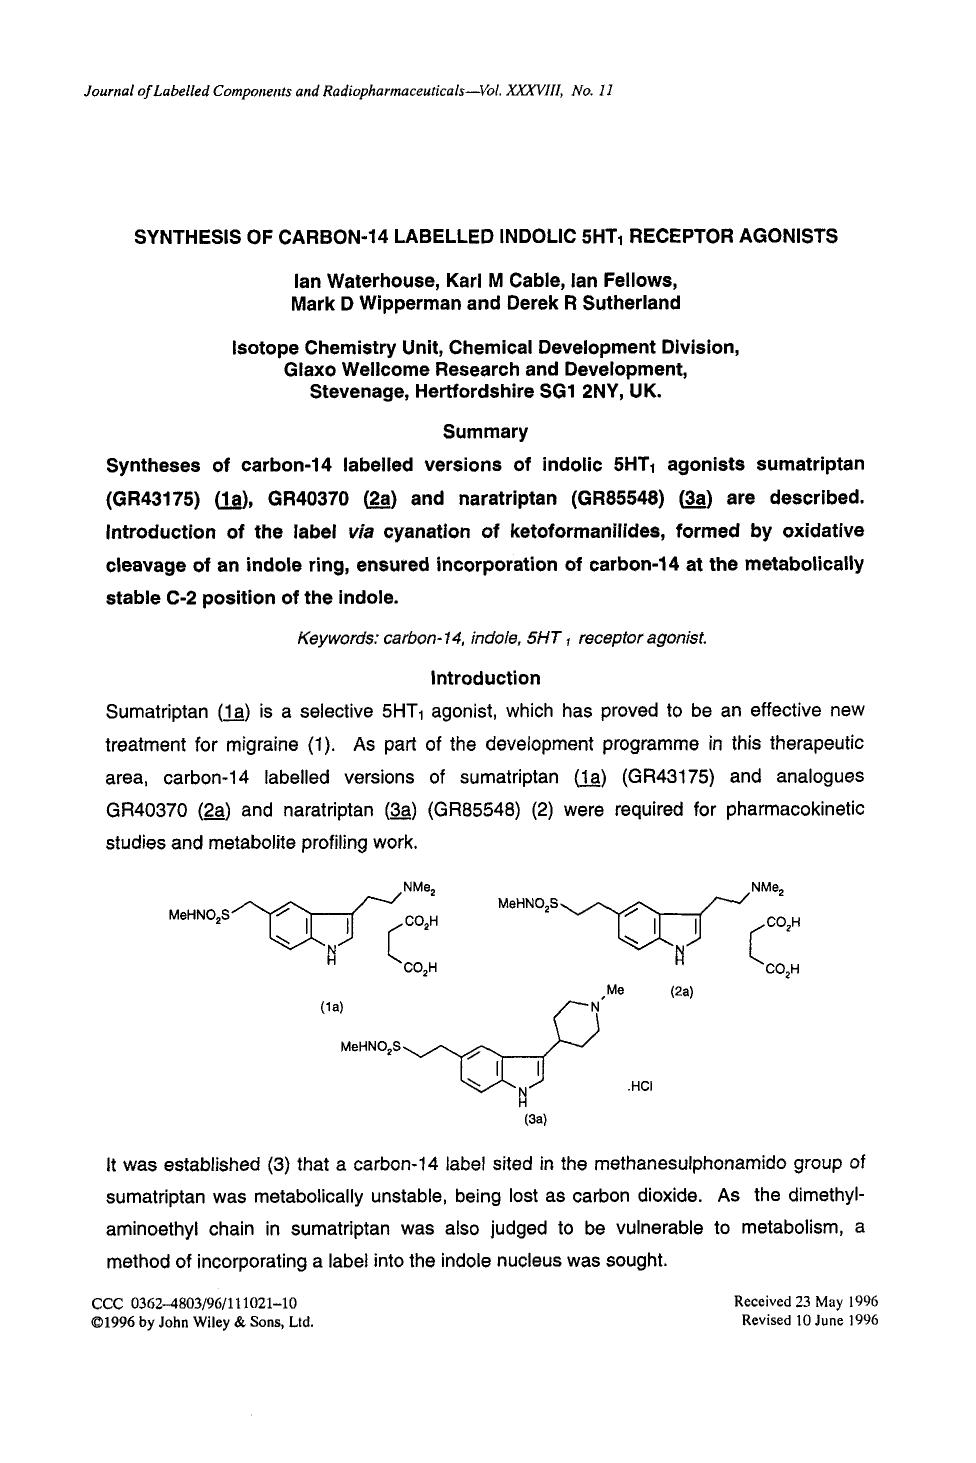 Synthesis of carbon-14 labelled indolic 5HT1 receptor agonists by Unknown